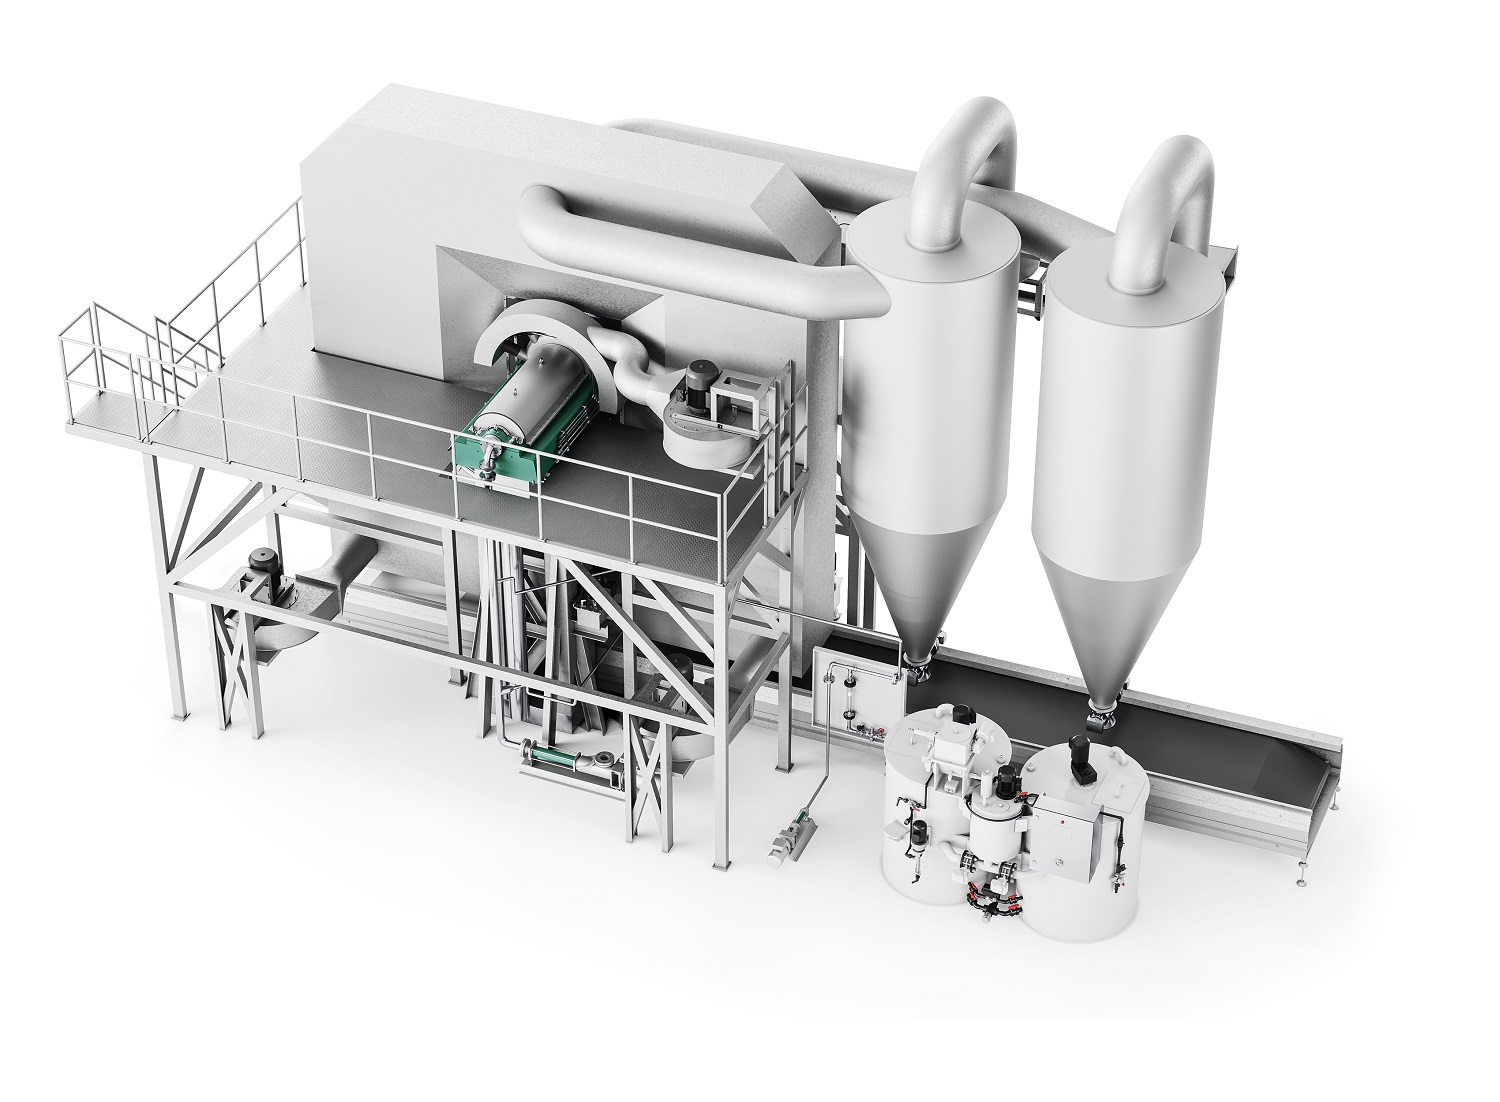 GEA will debut the GEA biosolids Granulator at WEFTEC 2021 and its specialists will be at Booth #63.